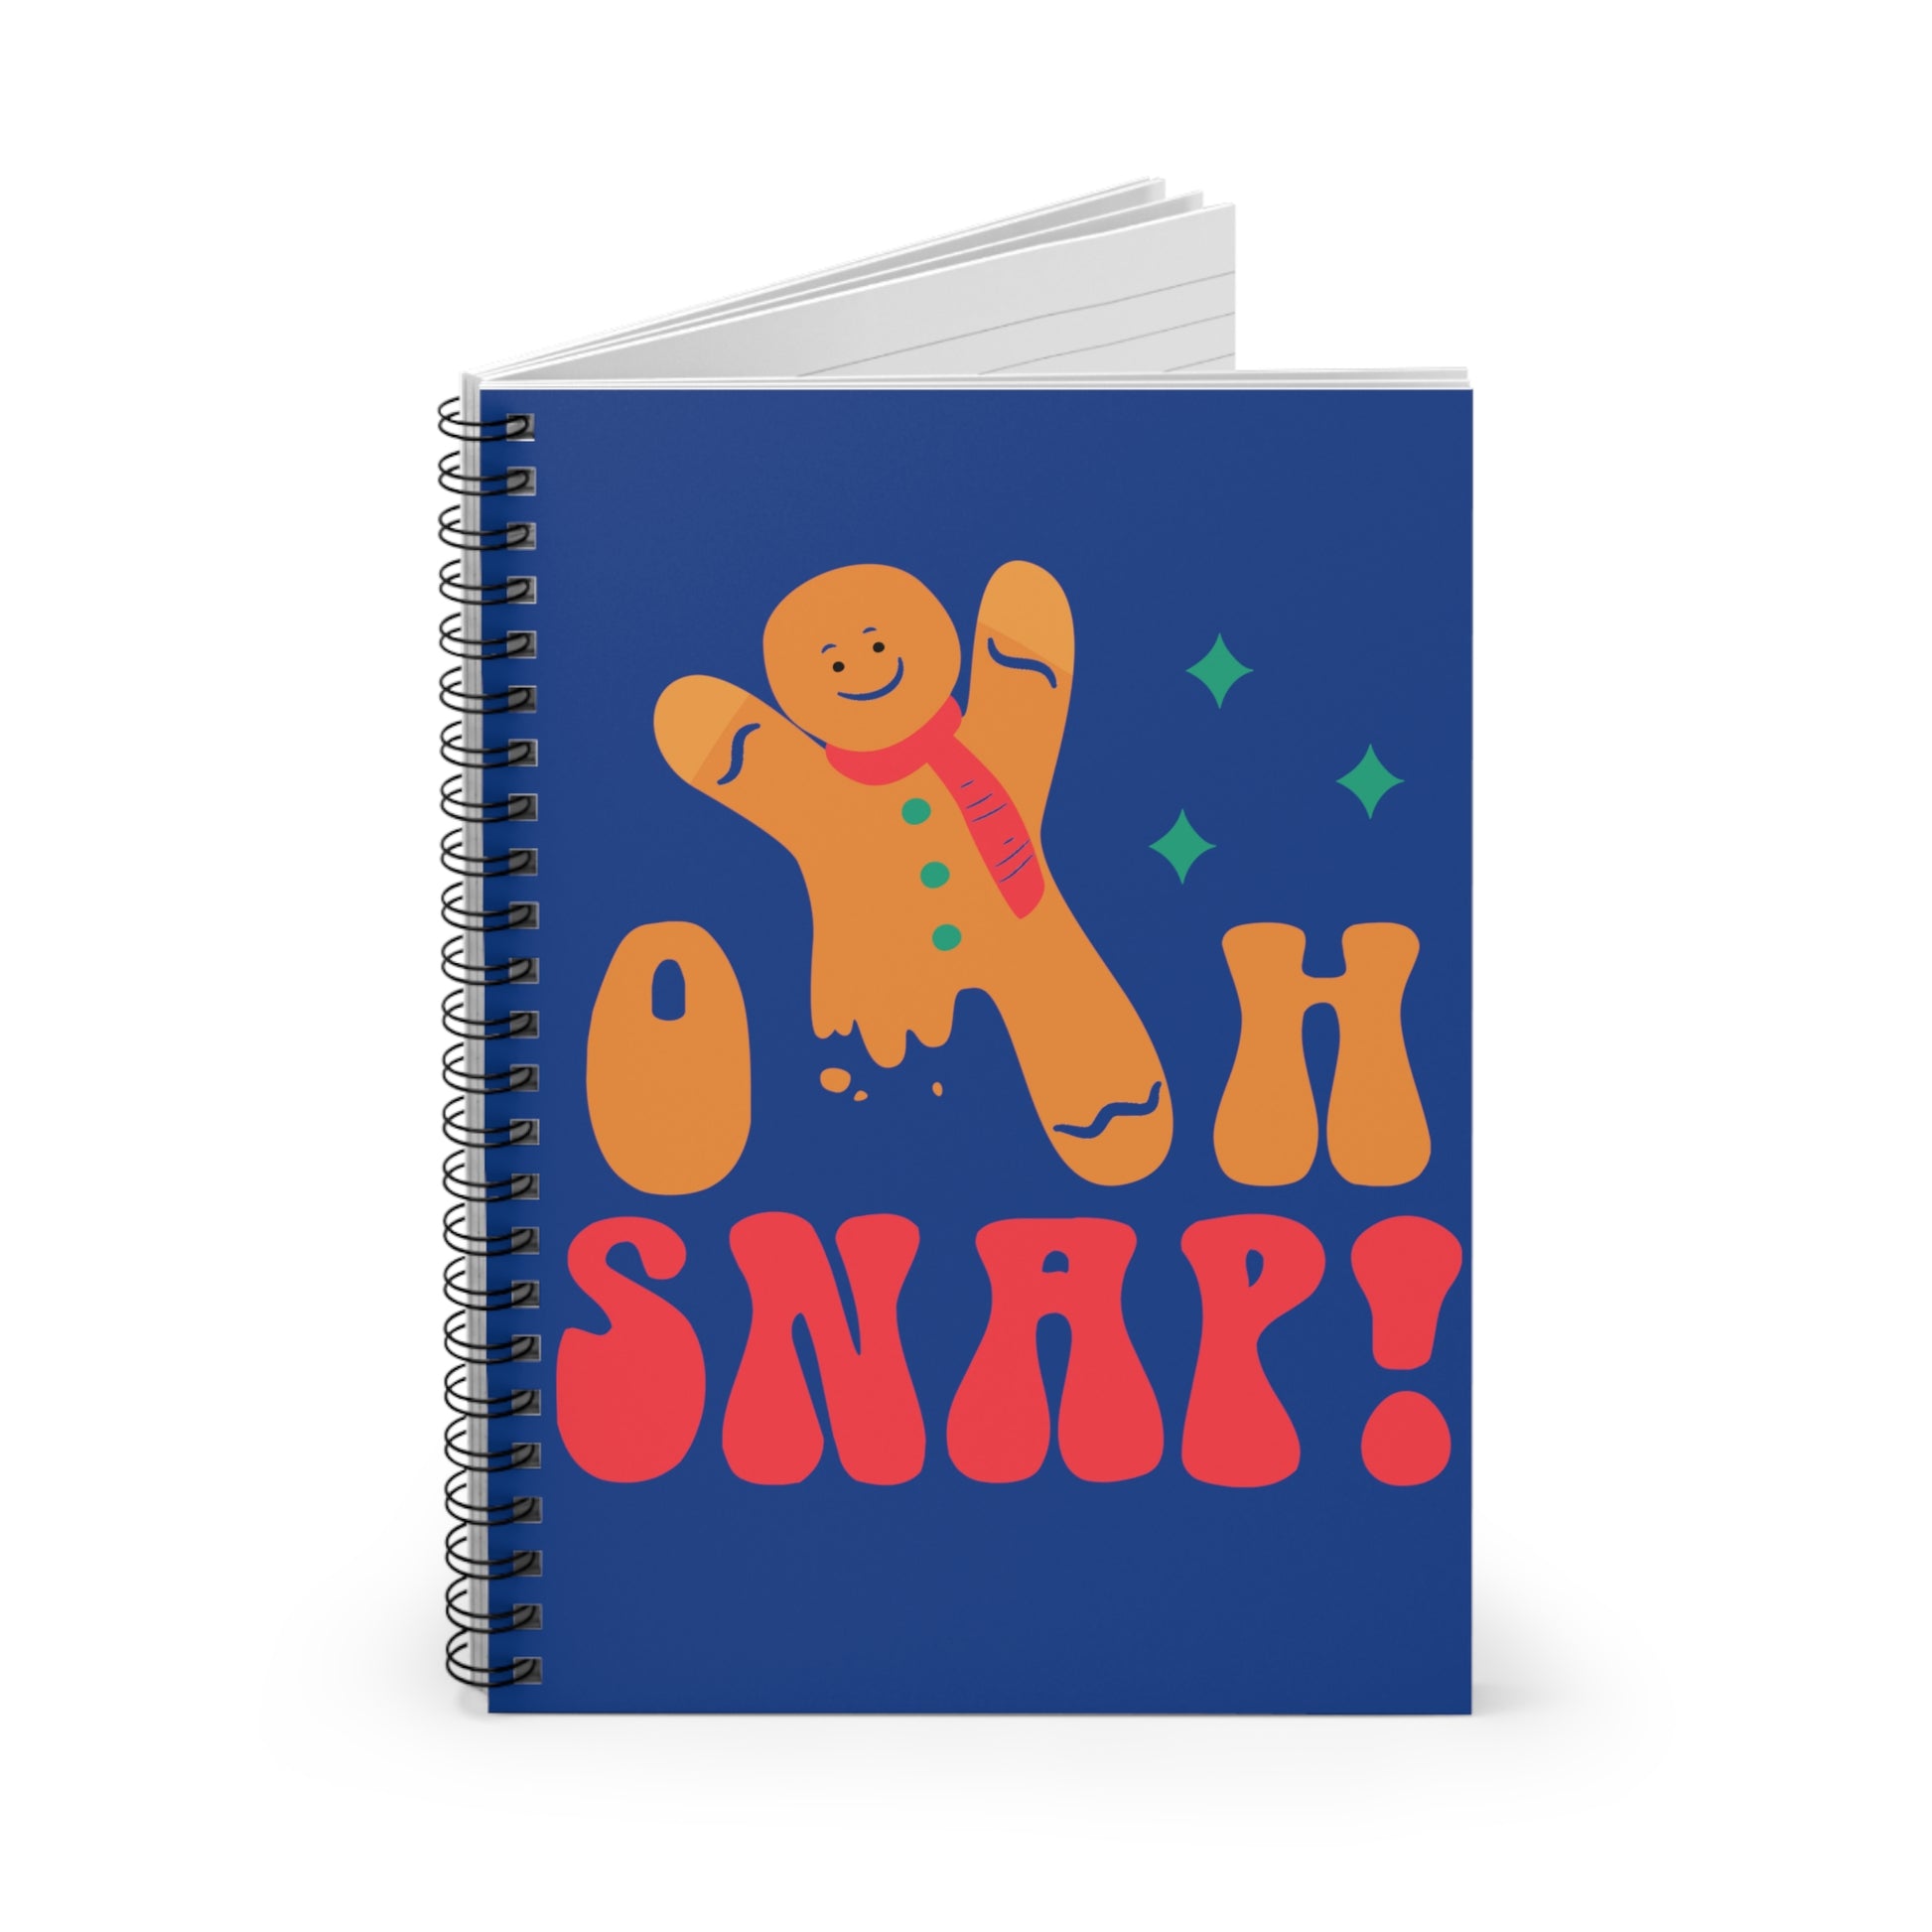 Oh SNAP Christmas Gingerbread Man: Spiral Notebook - Log Books - Journals - Diaries - and More Custom Printed by TheGlassyLass